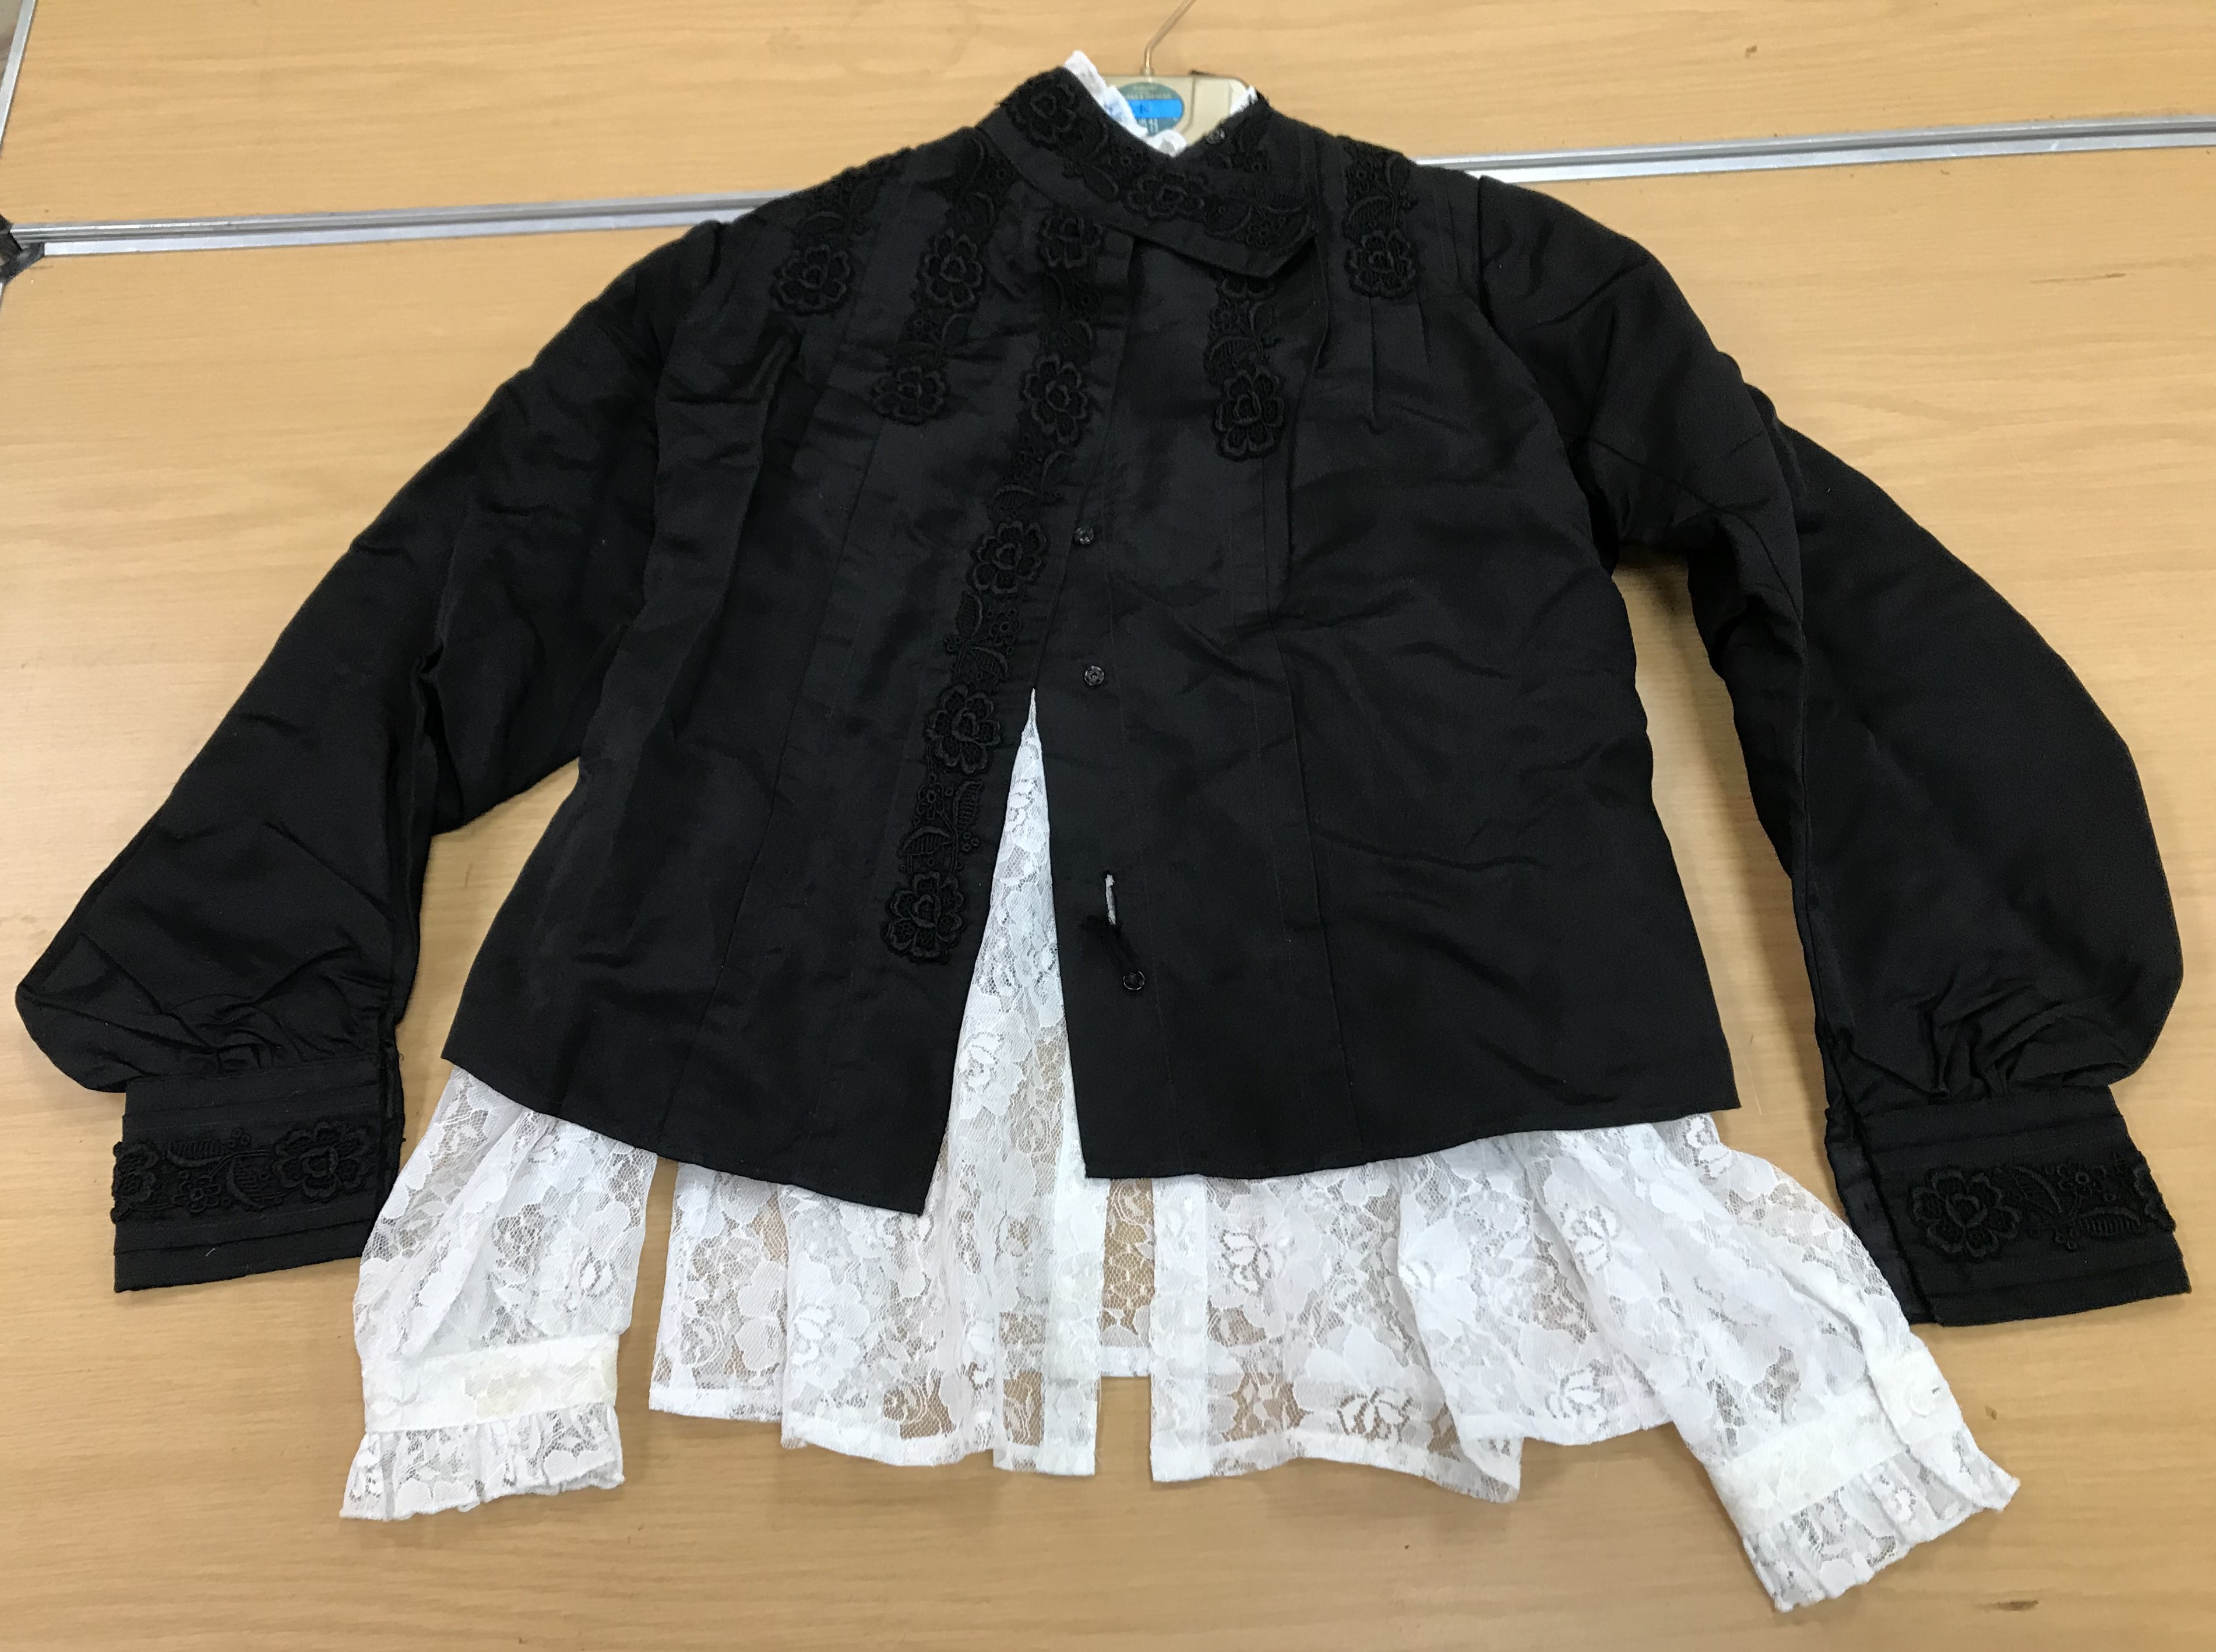 A Victorian mourning cape with applique decoration and lace edge together with a Victorian style - Image 16 of 115